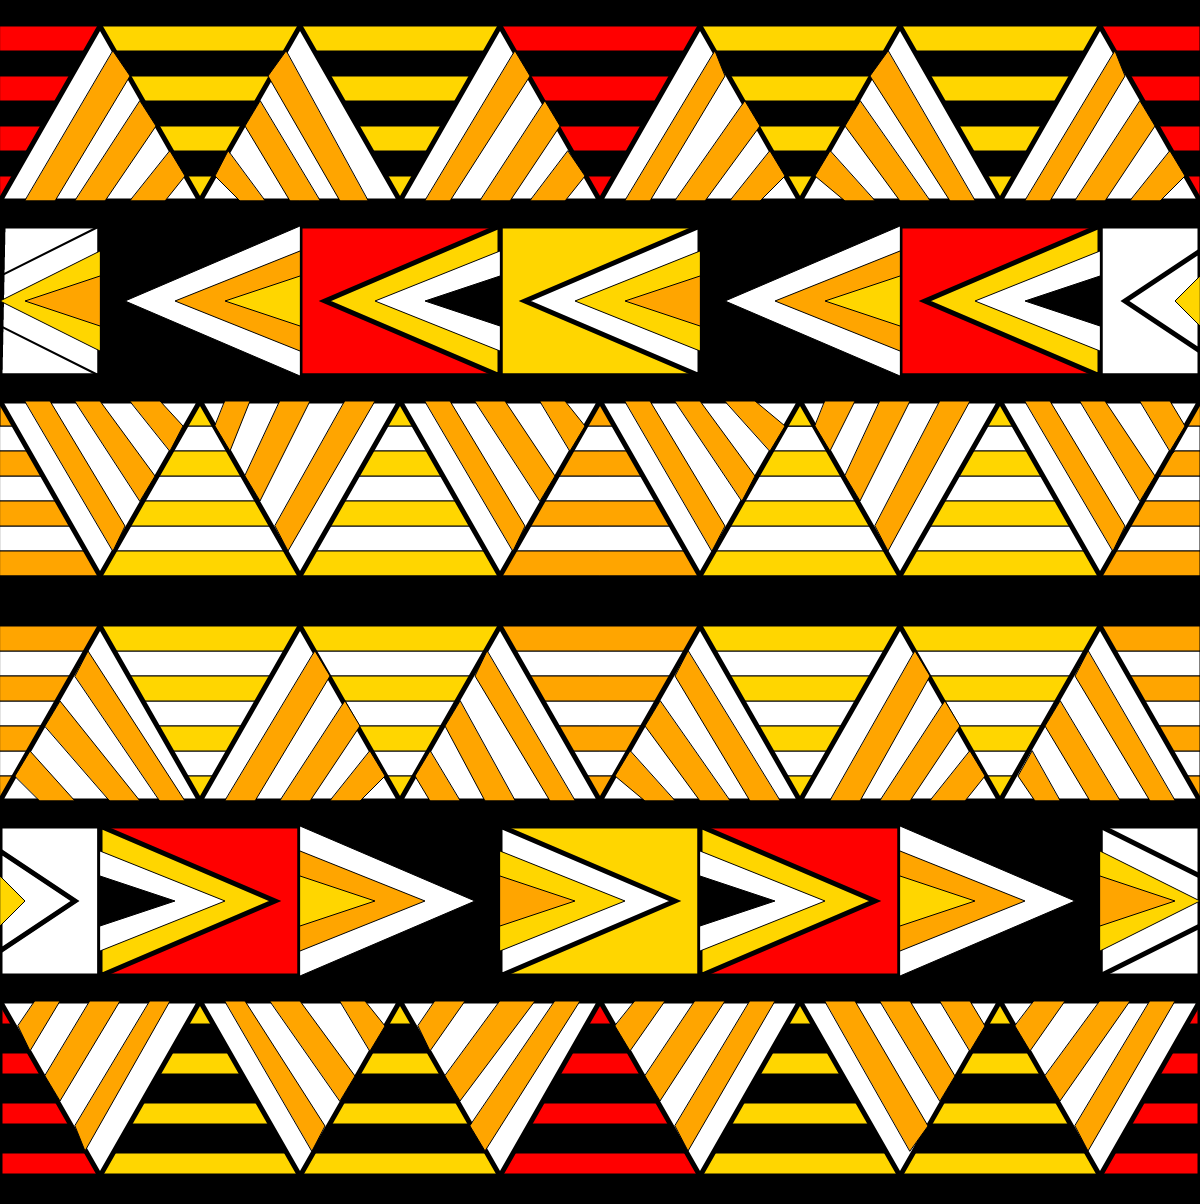 A pattern with lots of triangles of different colors forming stripes on a black background.